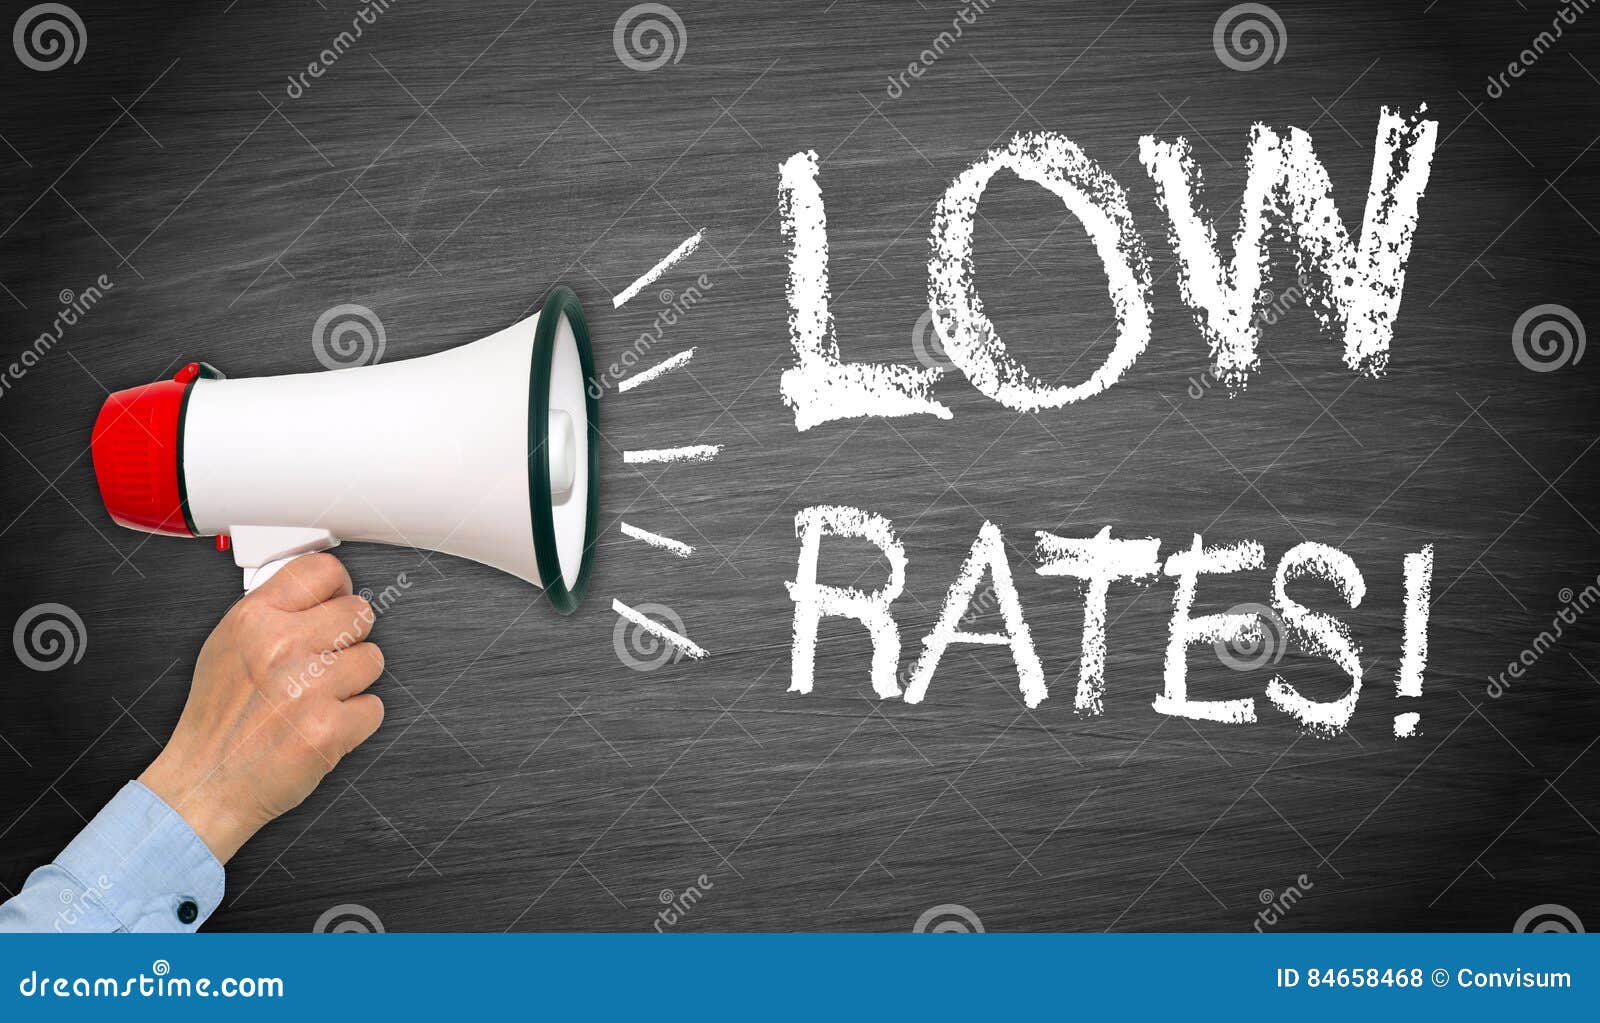 low rates marketing and sales concept